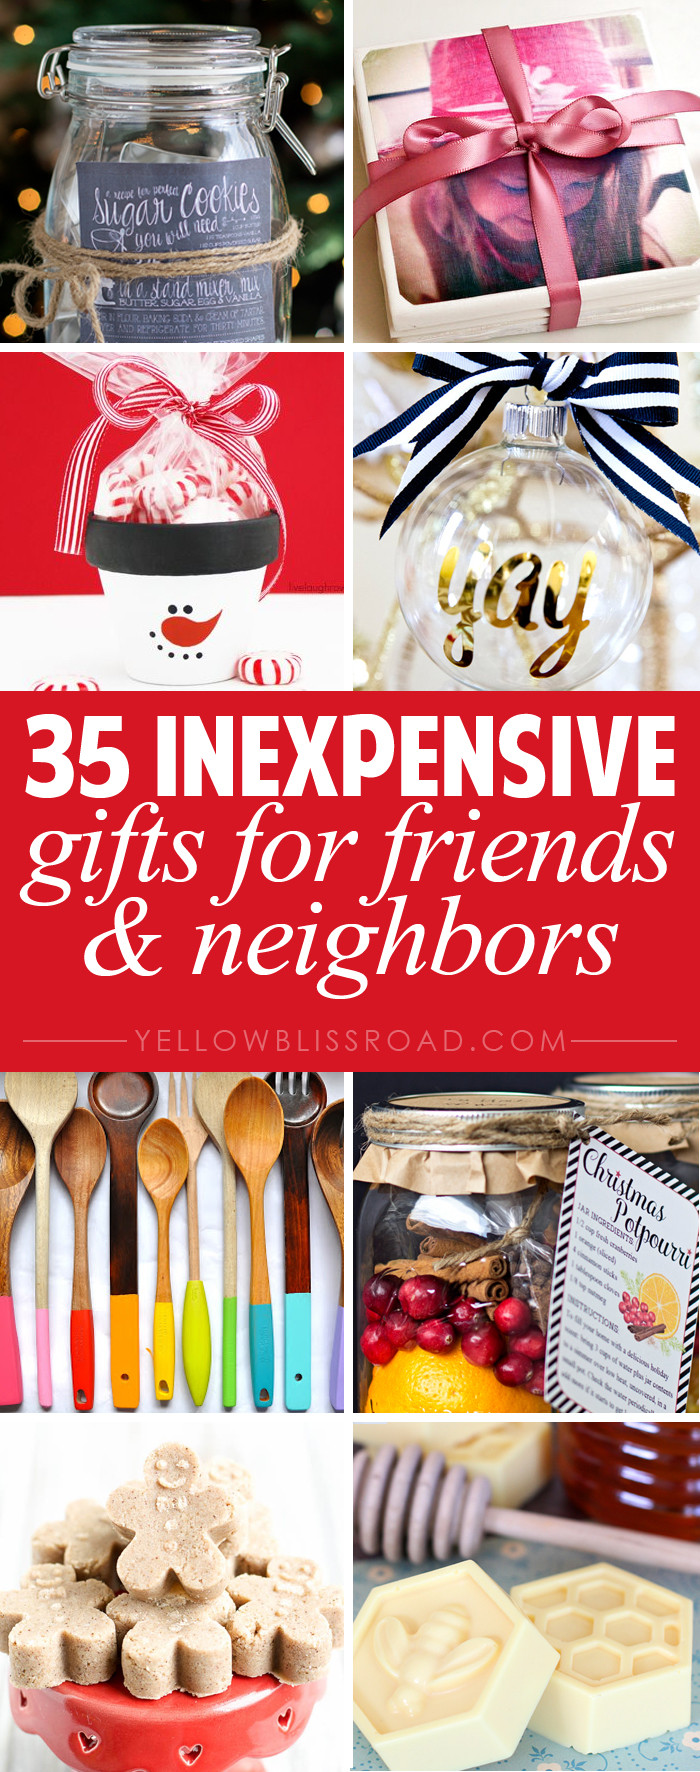 DIY Christmas Gifts For Friends
 35 Gift Ideas for Neighbors and Friends Yellow Bliss Road